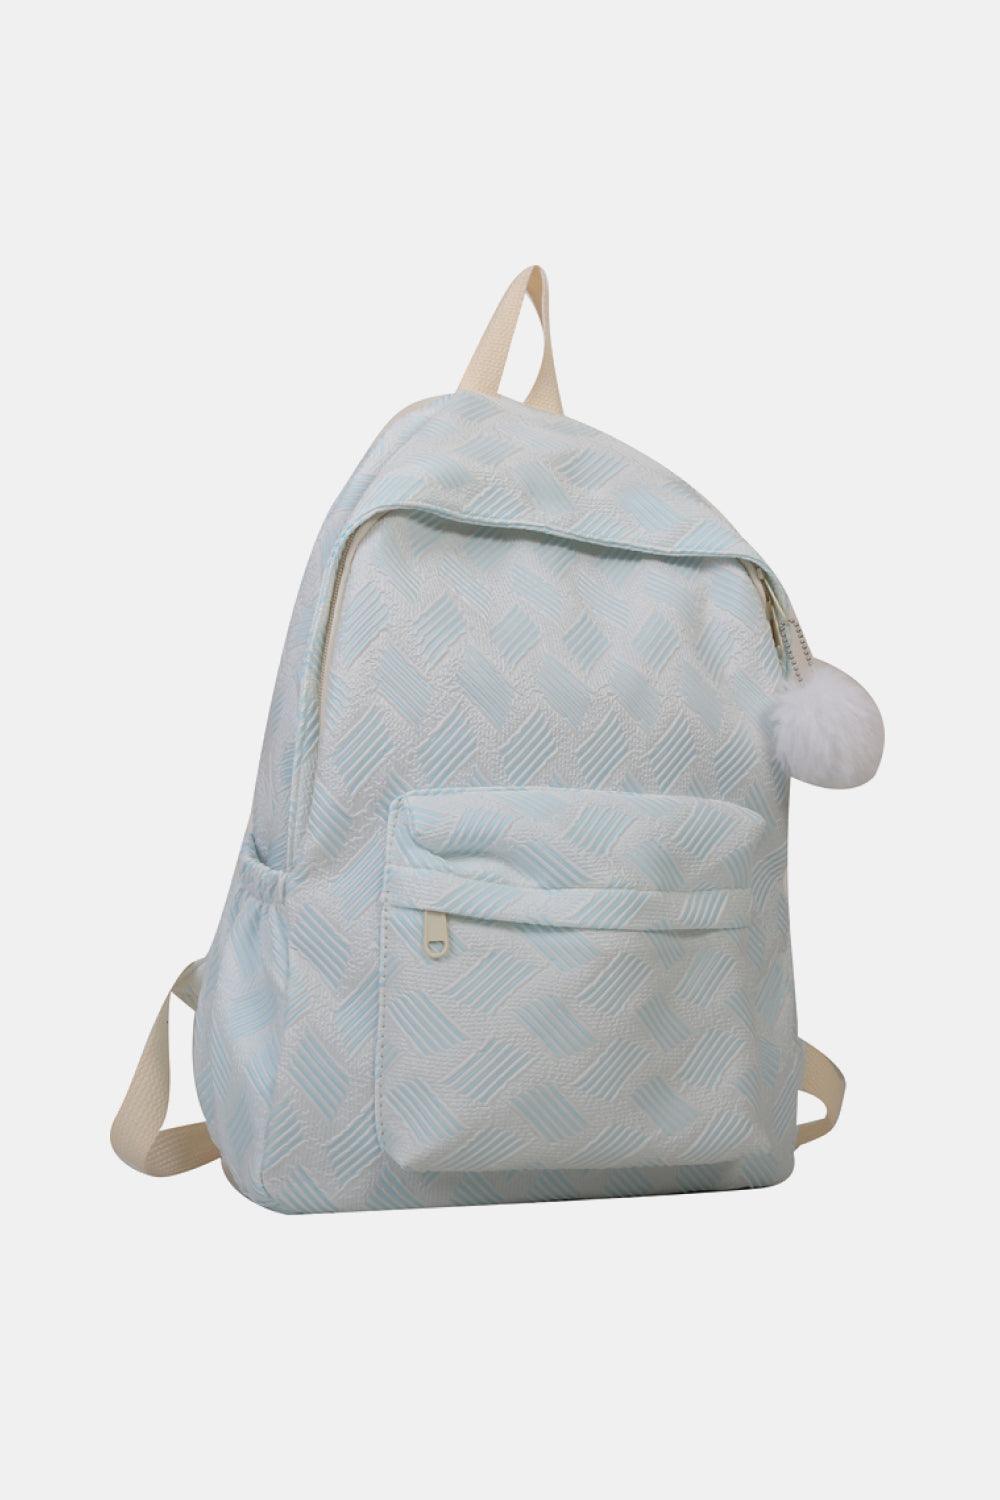 Printed Polyester Large Backpack - Olive Ave